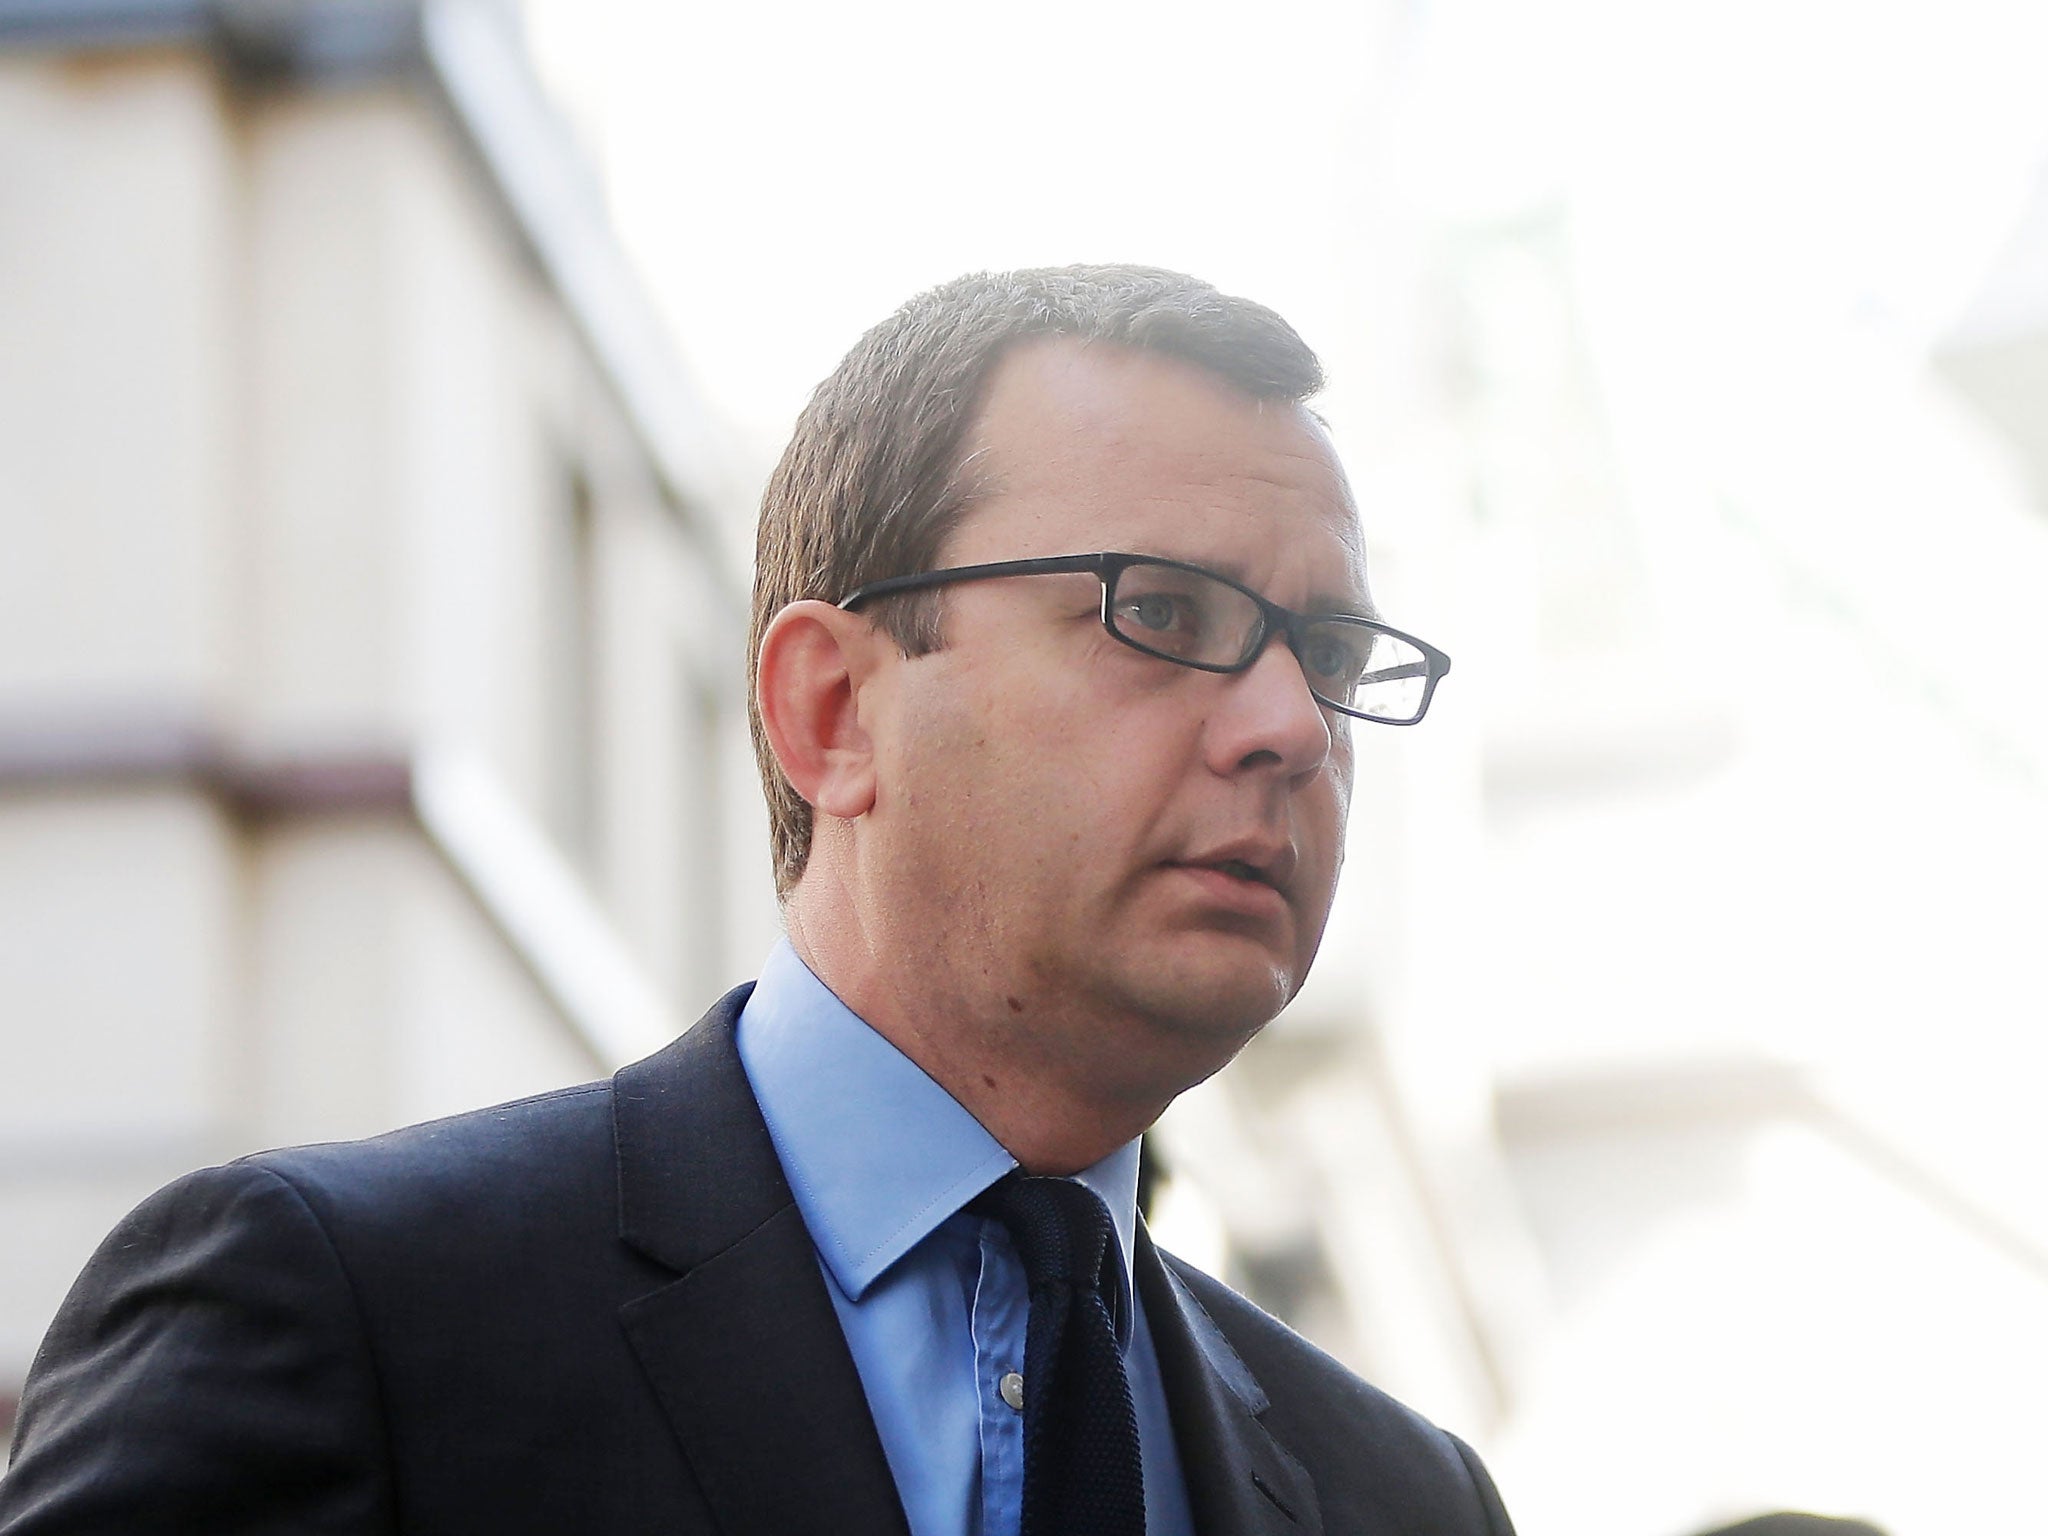 Former government Director of Communications and News of The World editor Andy Coulson arrives at the Old Bailey on June 30, 2014 in London, England. Andy Coulson was found guilty of conspiracy to hack phones, and the jury are still out on a further charg